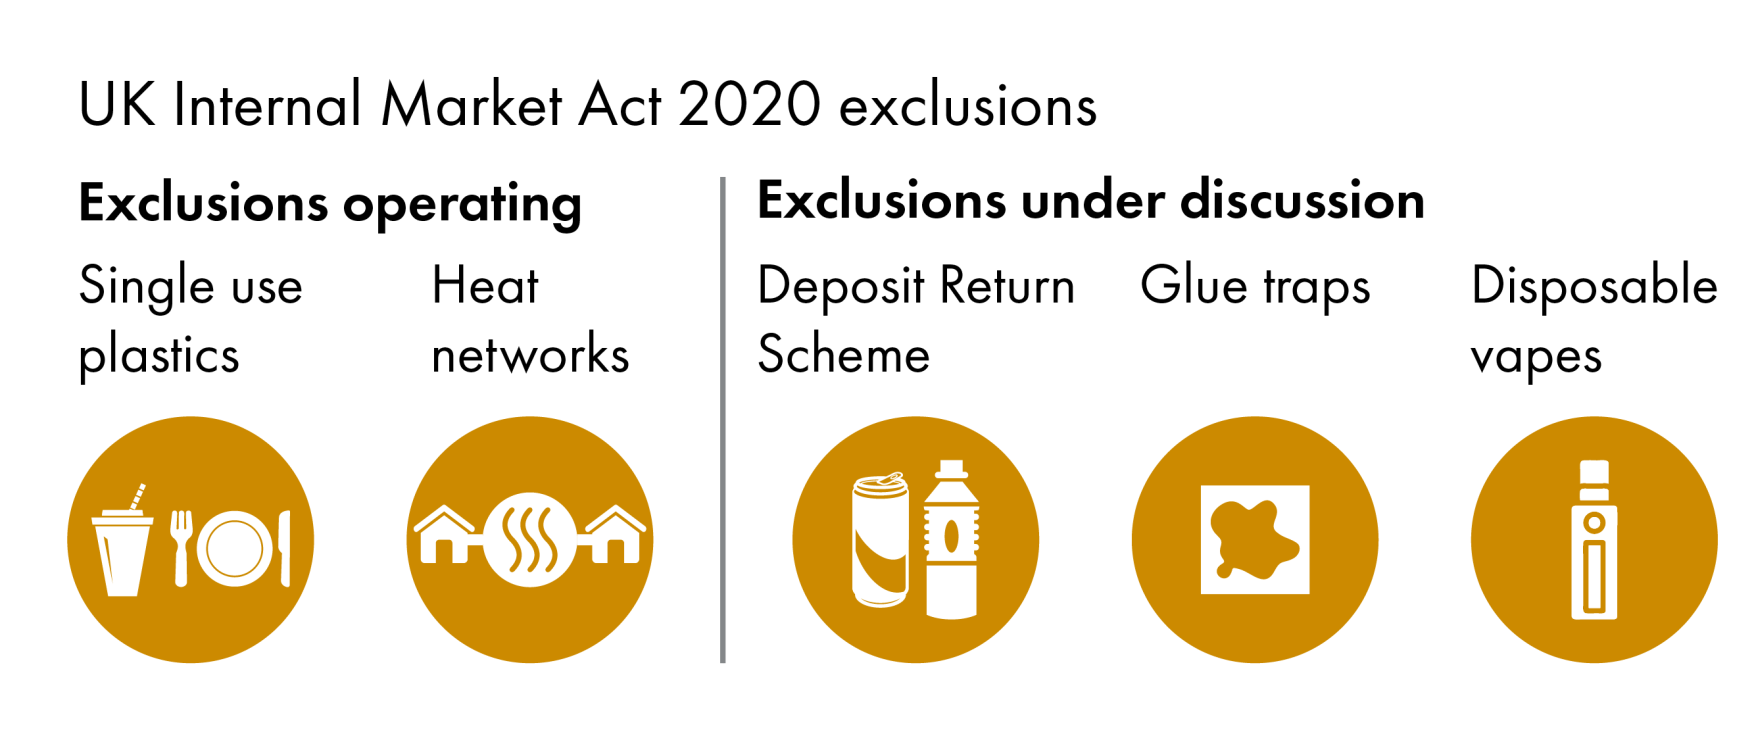 The infographic shows two exclusions (single use plastics and heat networks) operating and three exclusions (Deposit Return Scheme, Glue traps, Disposable vapes) under discussion.